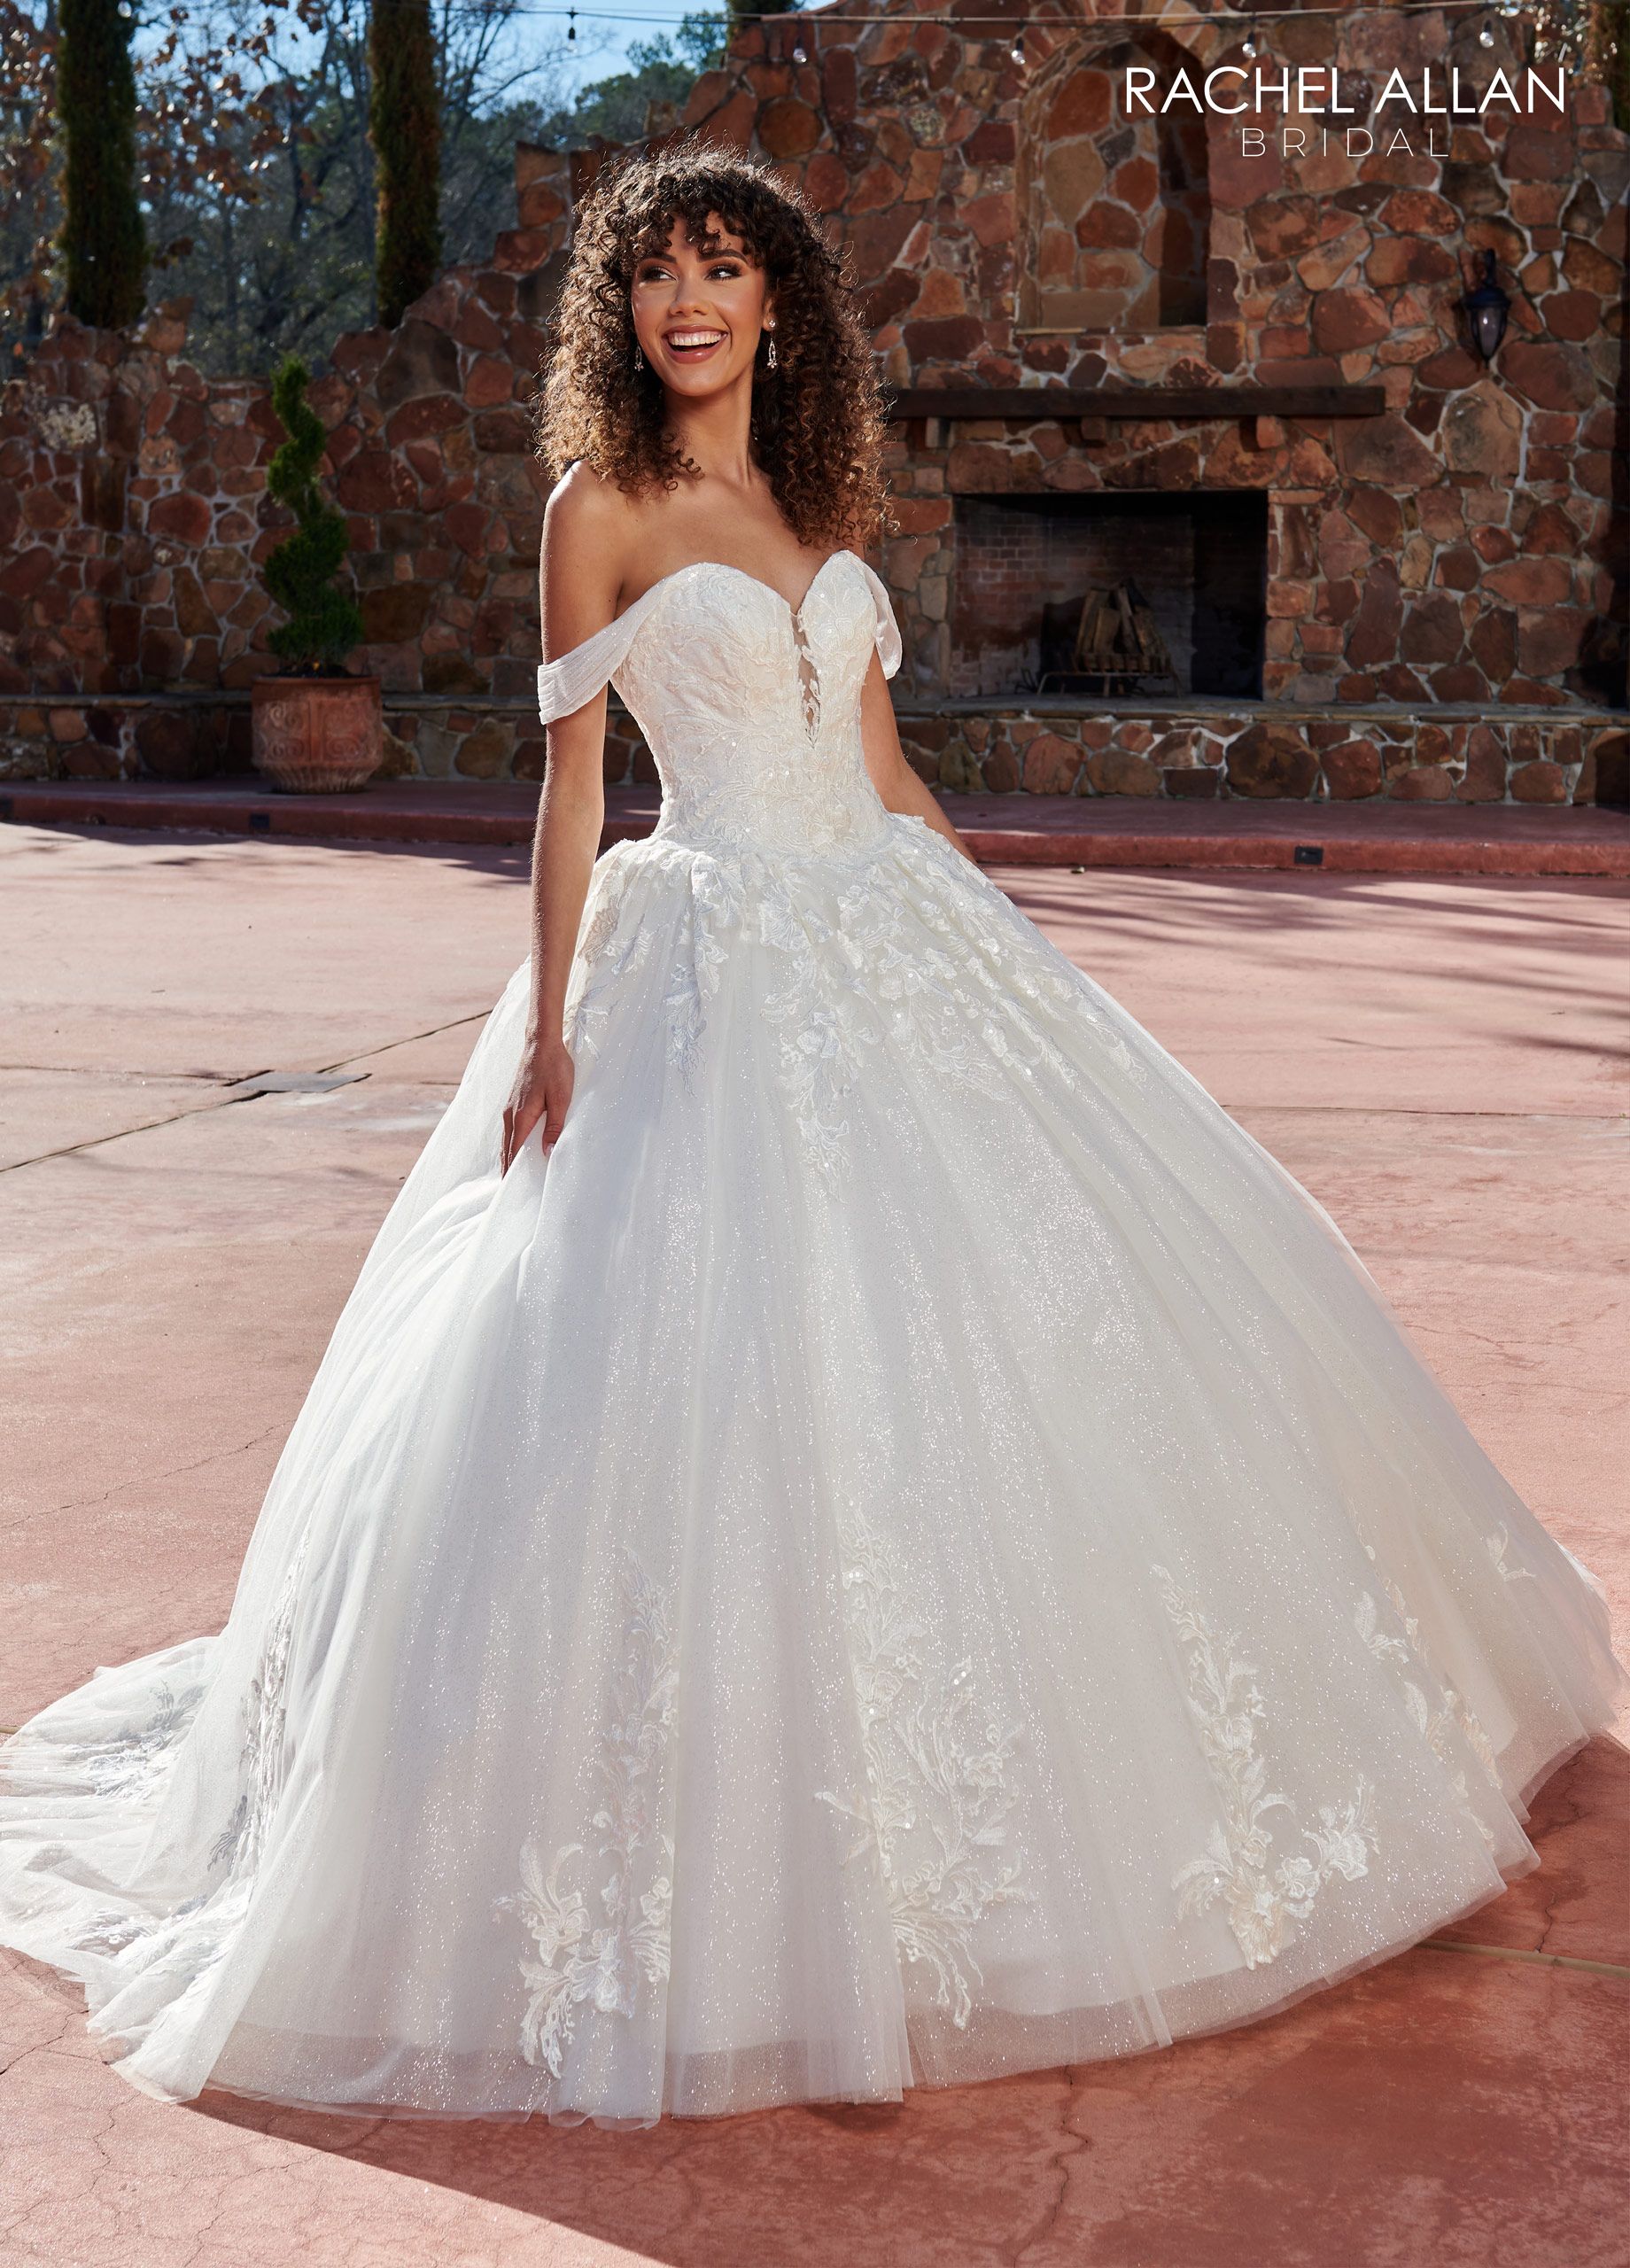 Sleeveless Ball Gown Wedding Dress With Lace And Sparkle Tulle | Kleinfeld  Bridal